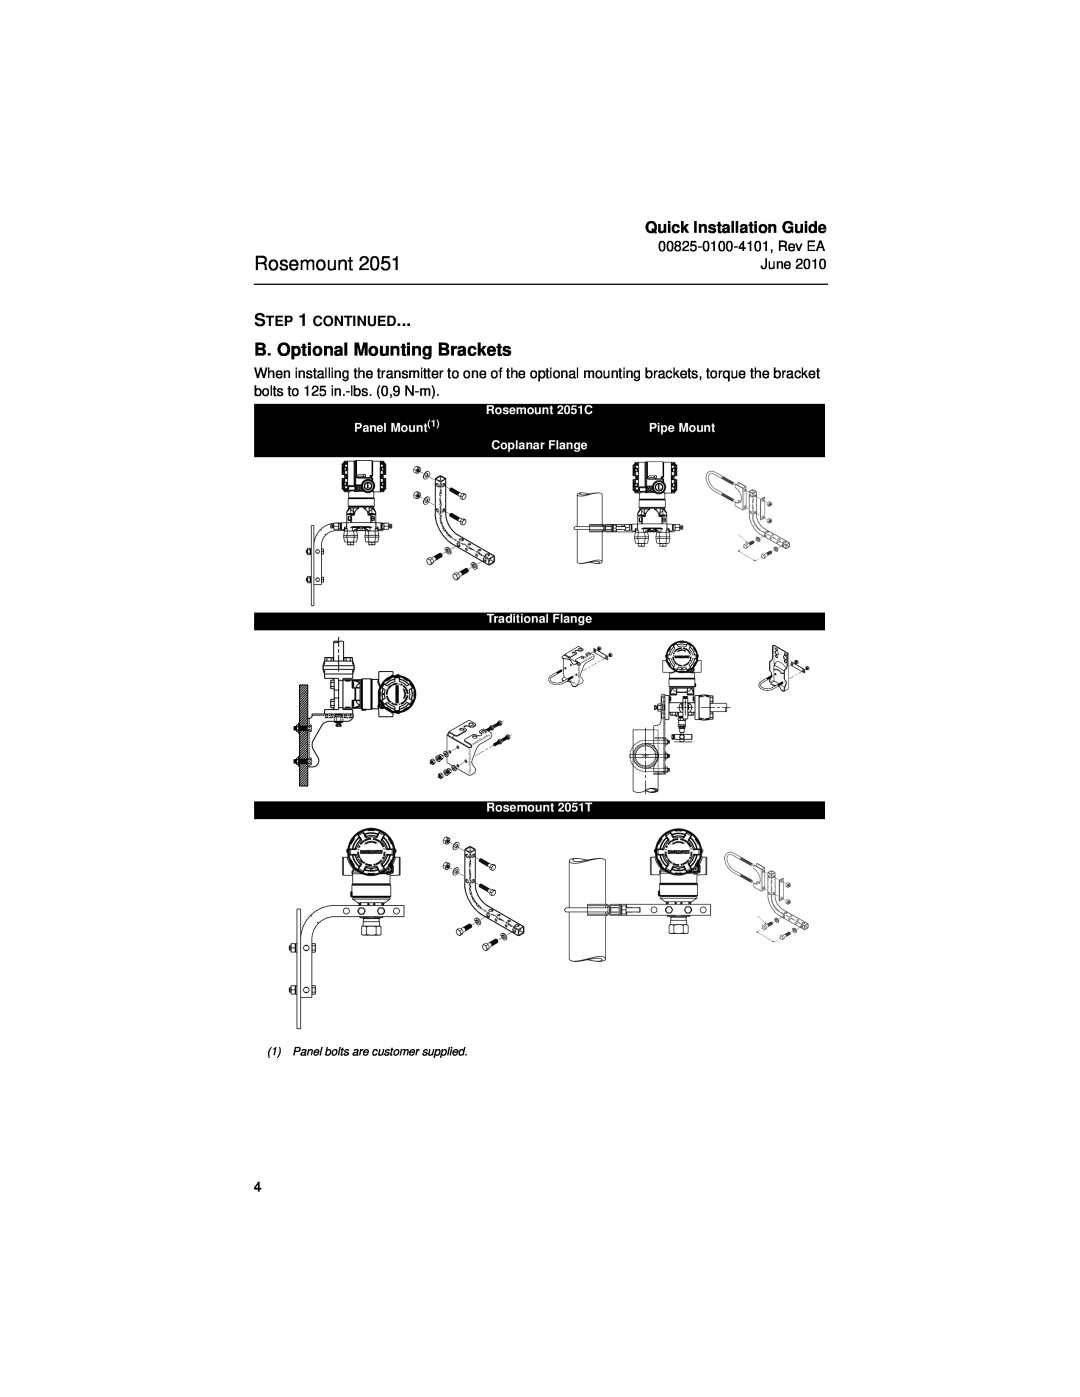 Emerson Process Management 2051CF manual Rosemount, B. Optional Mounting Brackets, Quick Installation Guide, Continued 